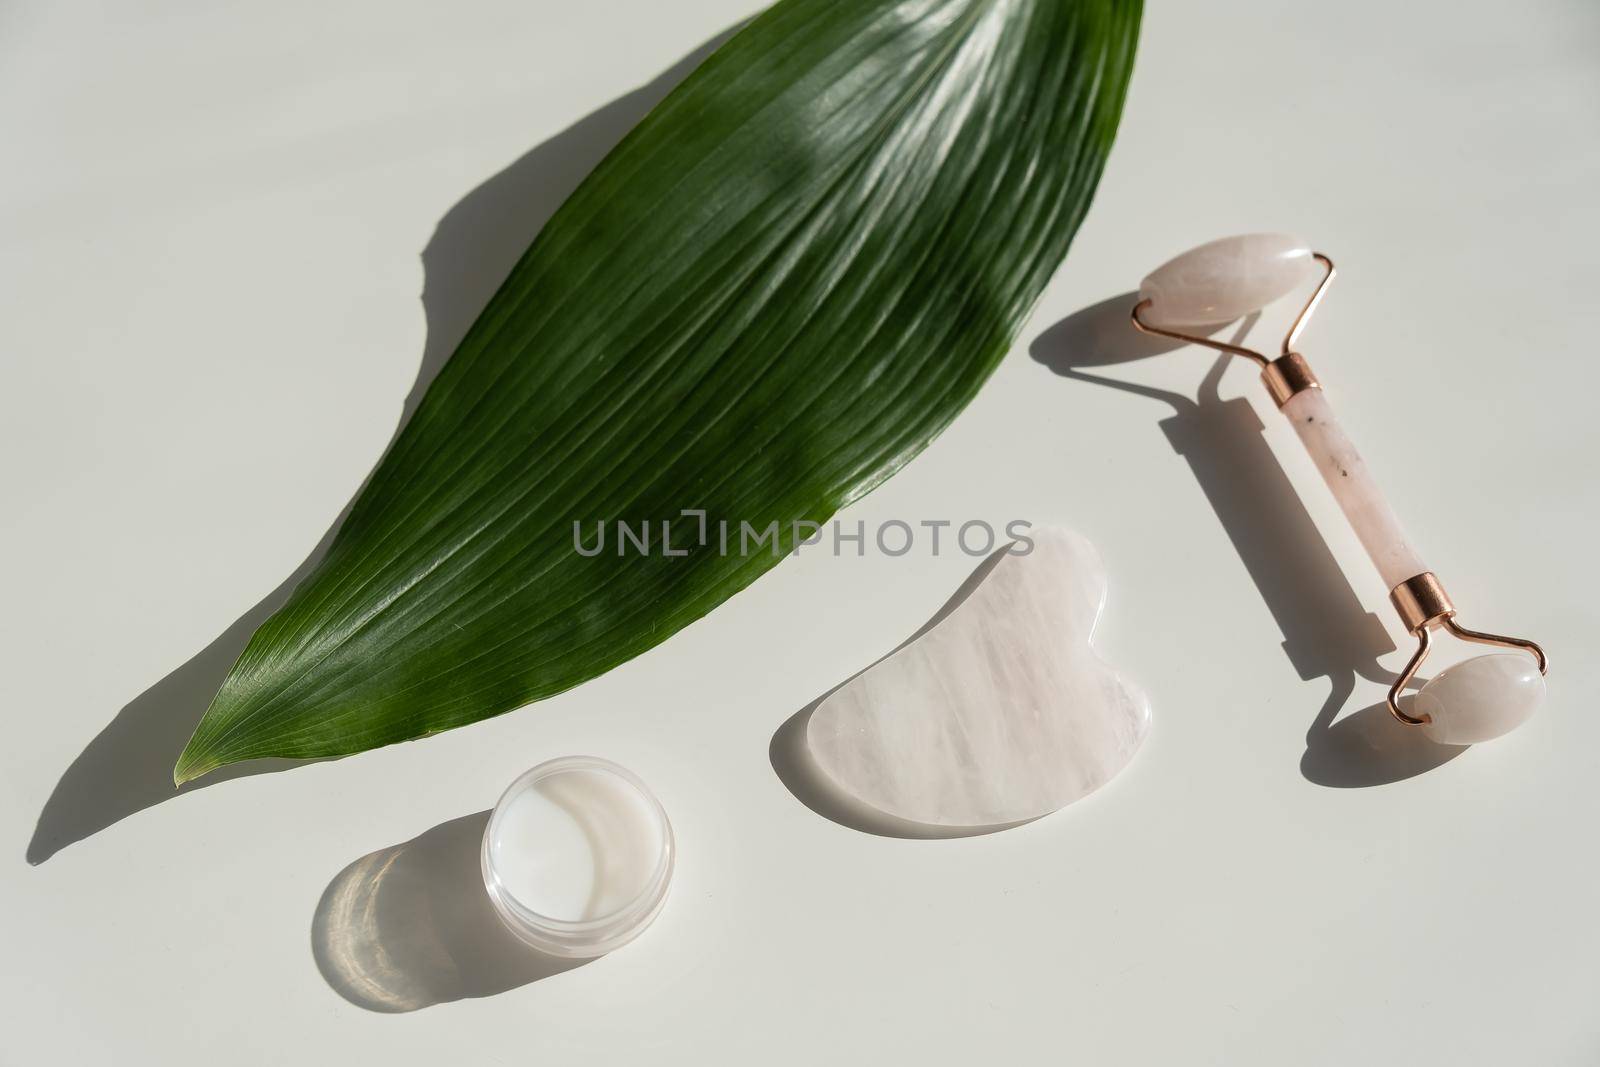 Pink gouache scraper, roller, jar of green leaf cream on a white table. Equipment for self-massage and skin care for the face and neck.